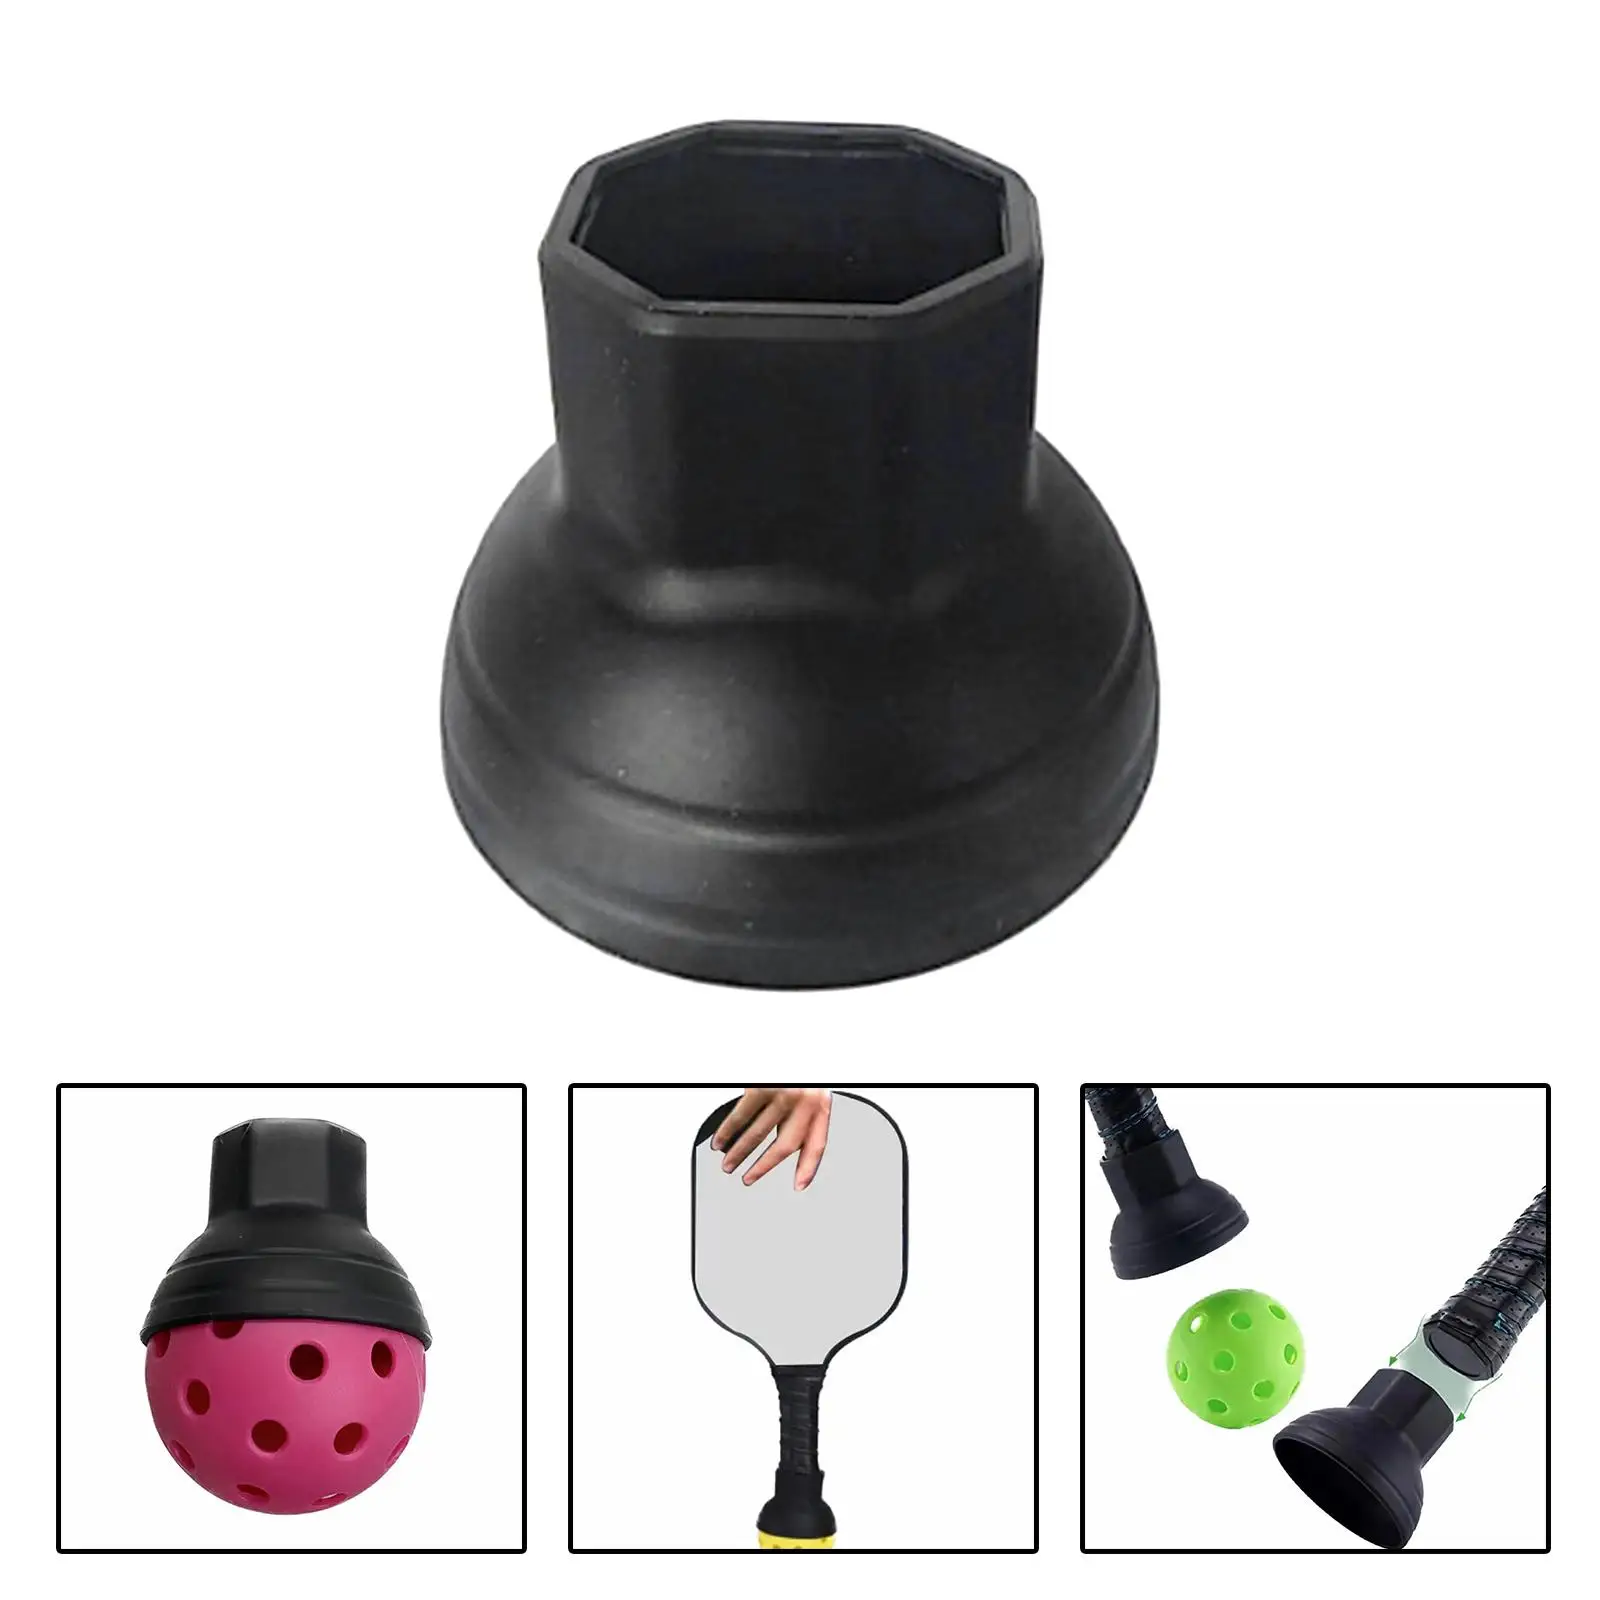 2x Pickleball Picker Picker Suction Cup without Bending over Pickup Tool Pickleball Ball Retriever for Putter Grip Training